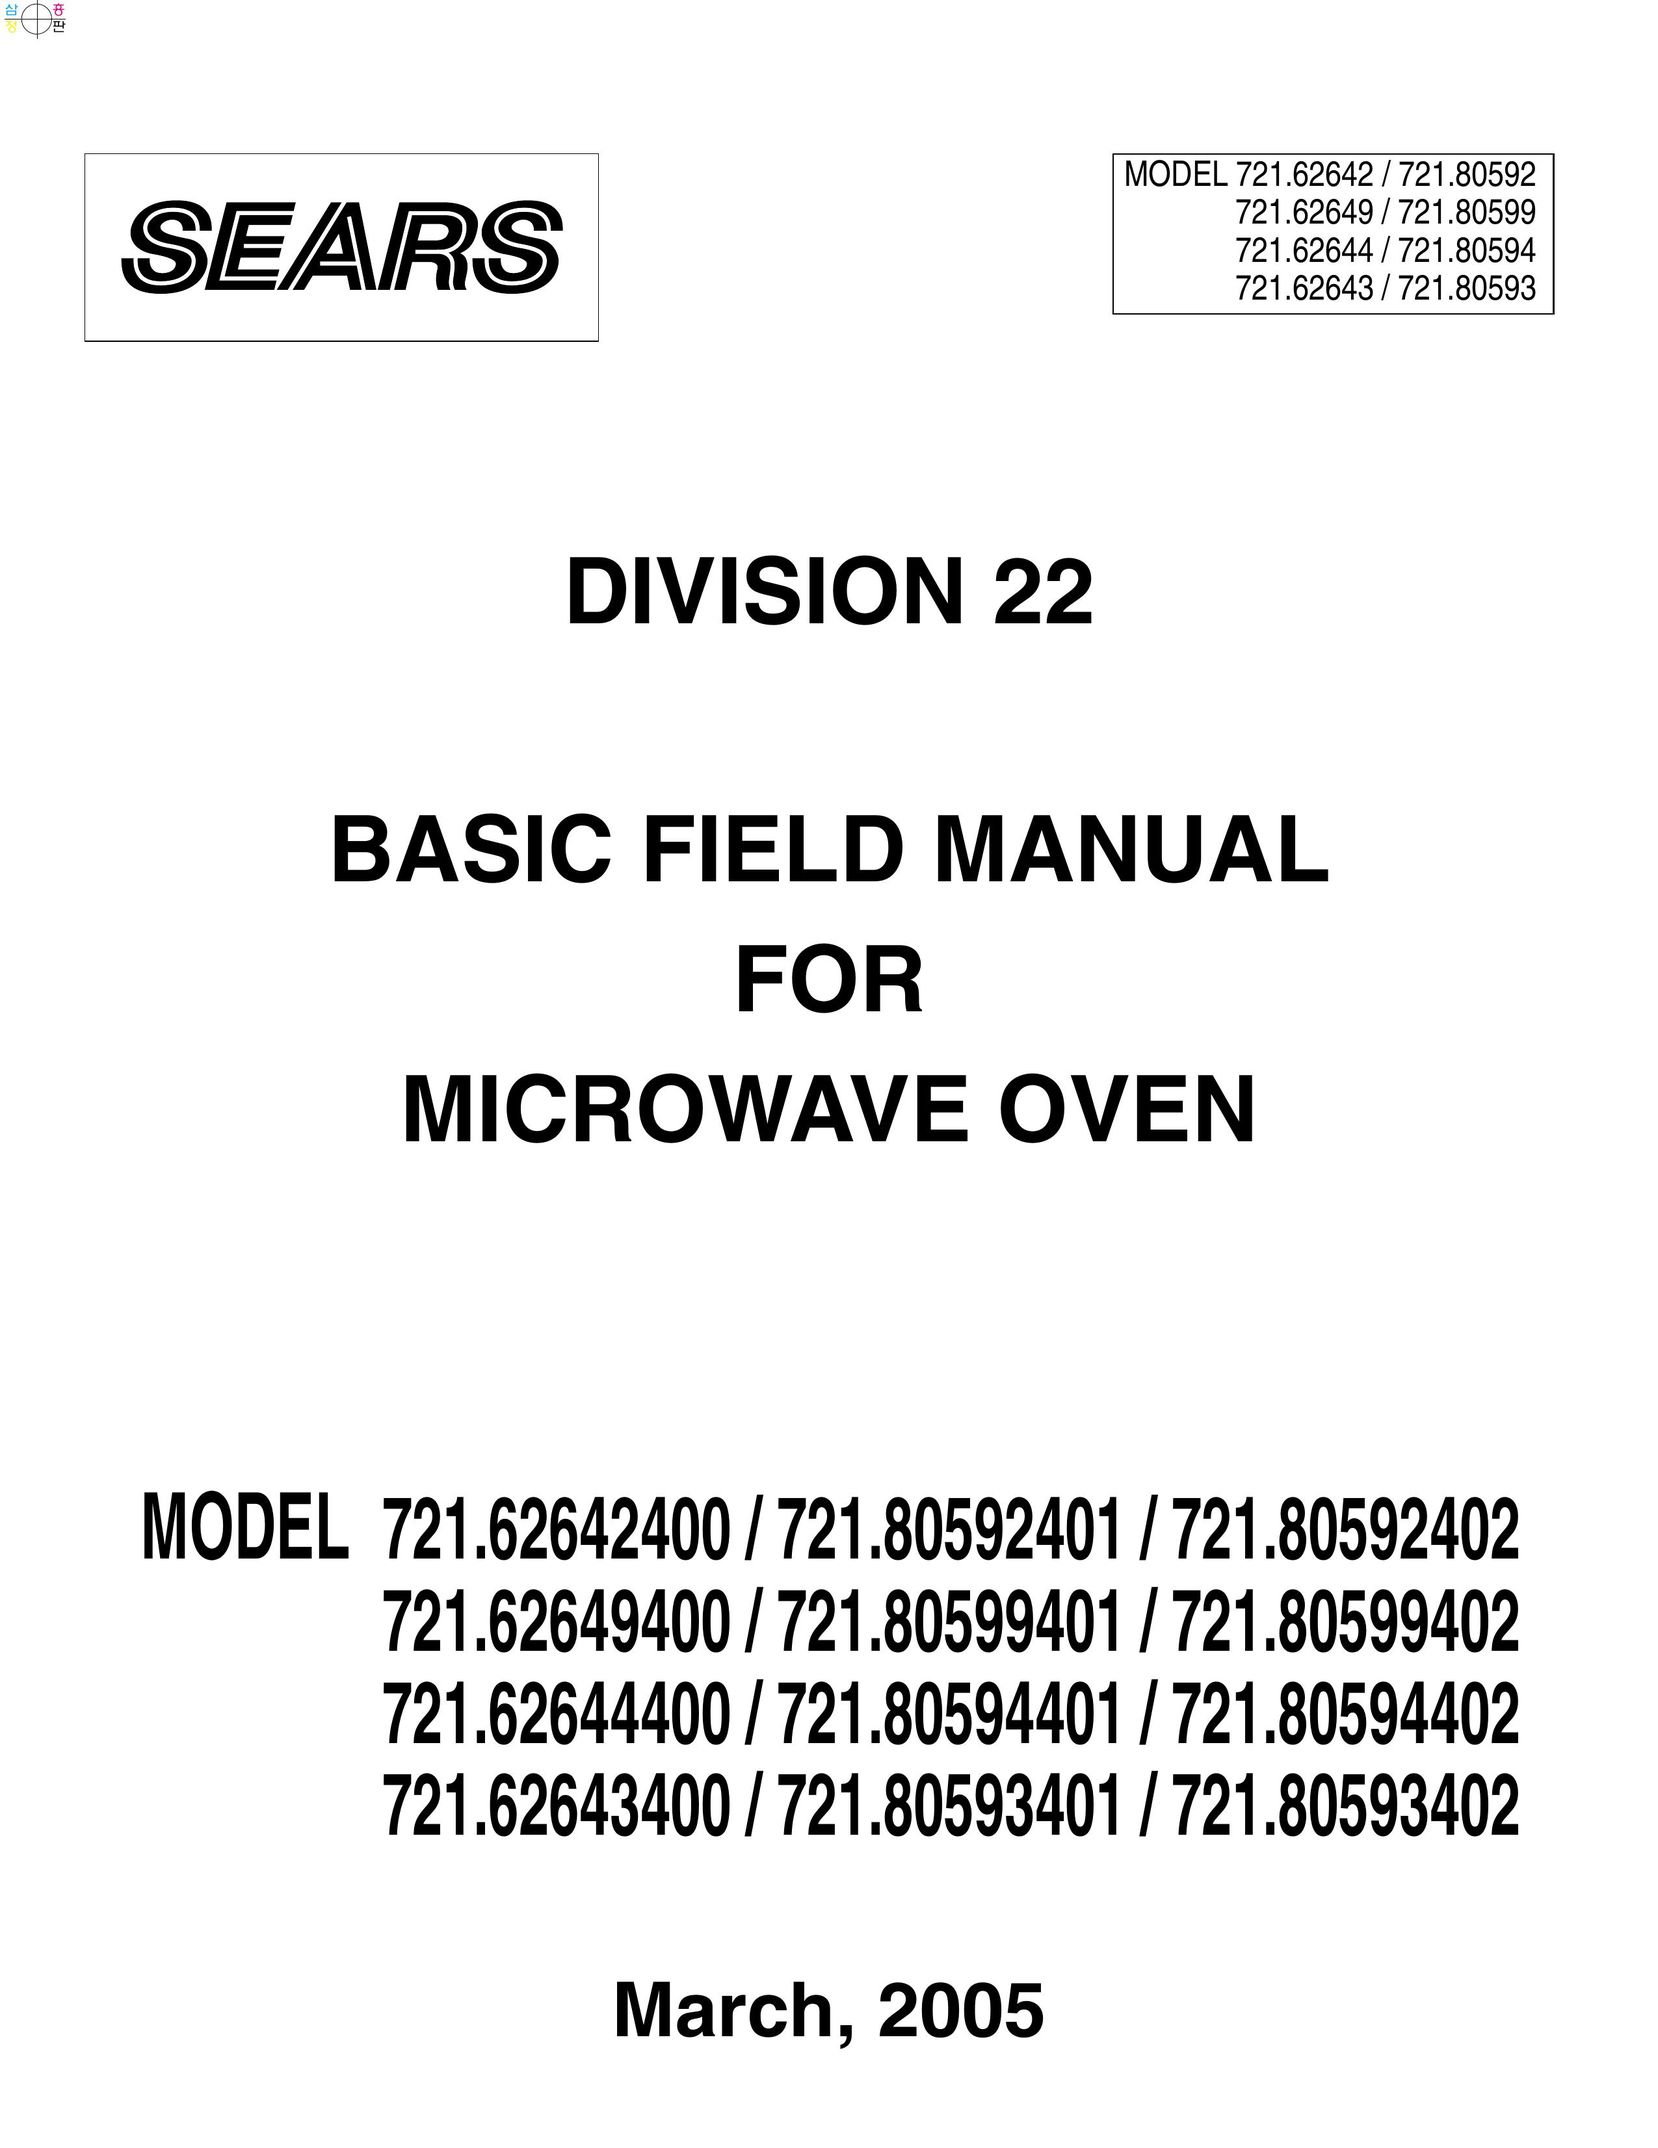 Kenmore 721.626444 Microwave Oven User Manual